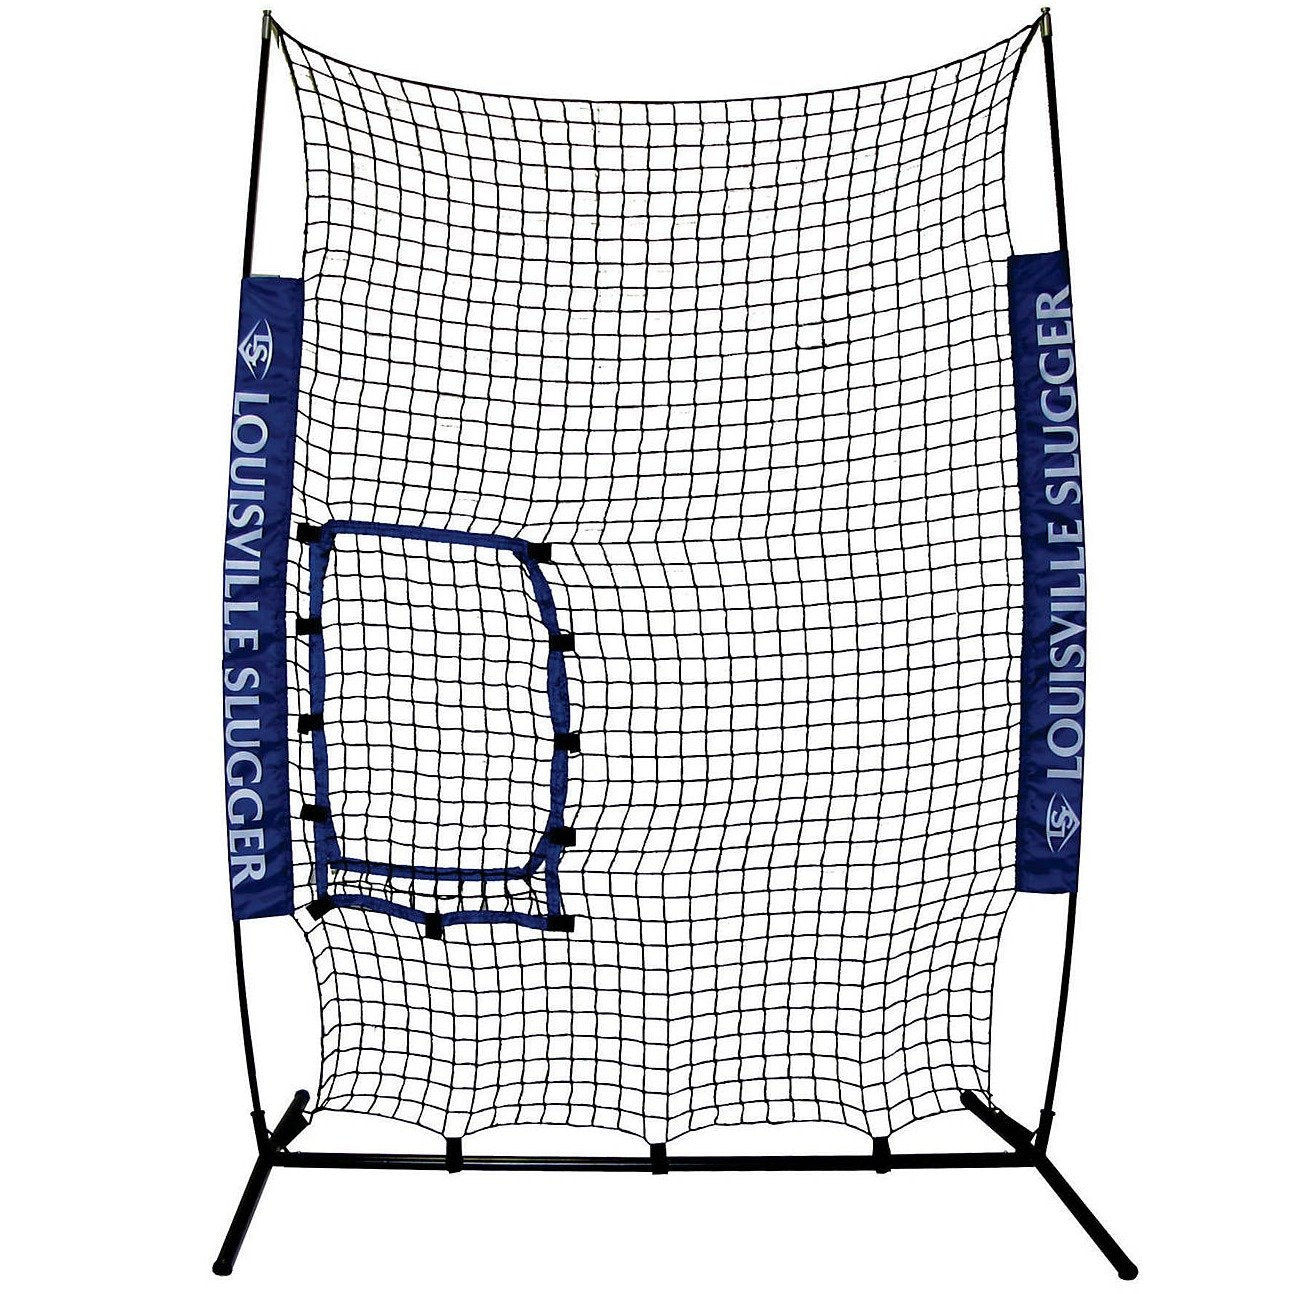 Louisville Slugger UPM 55 Blue Flame Pro Pitching Machine, Flex Protective Screen and Heater Sports 12-Pack Weighted Pitching Machine Baseballs Bundle - Pro-Distributing